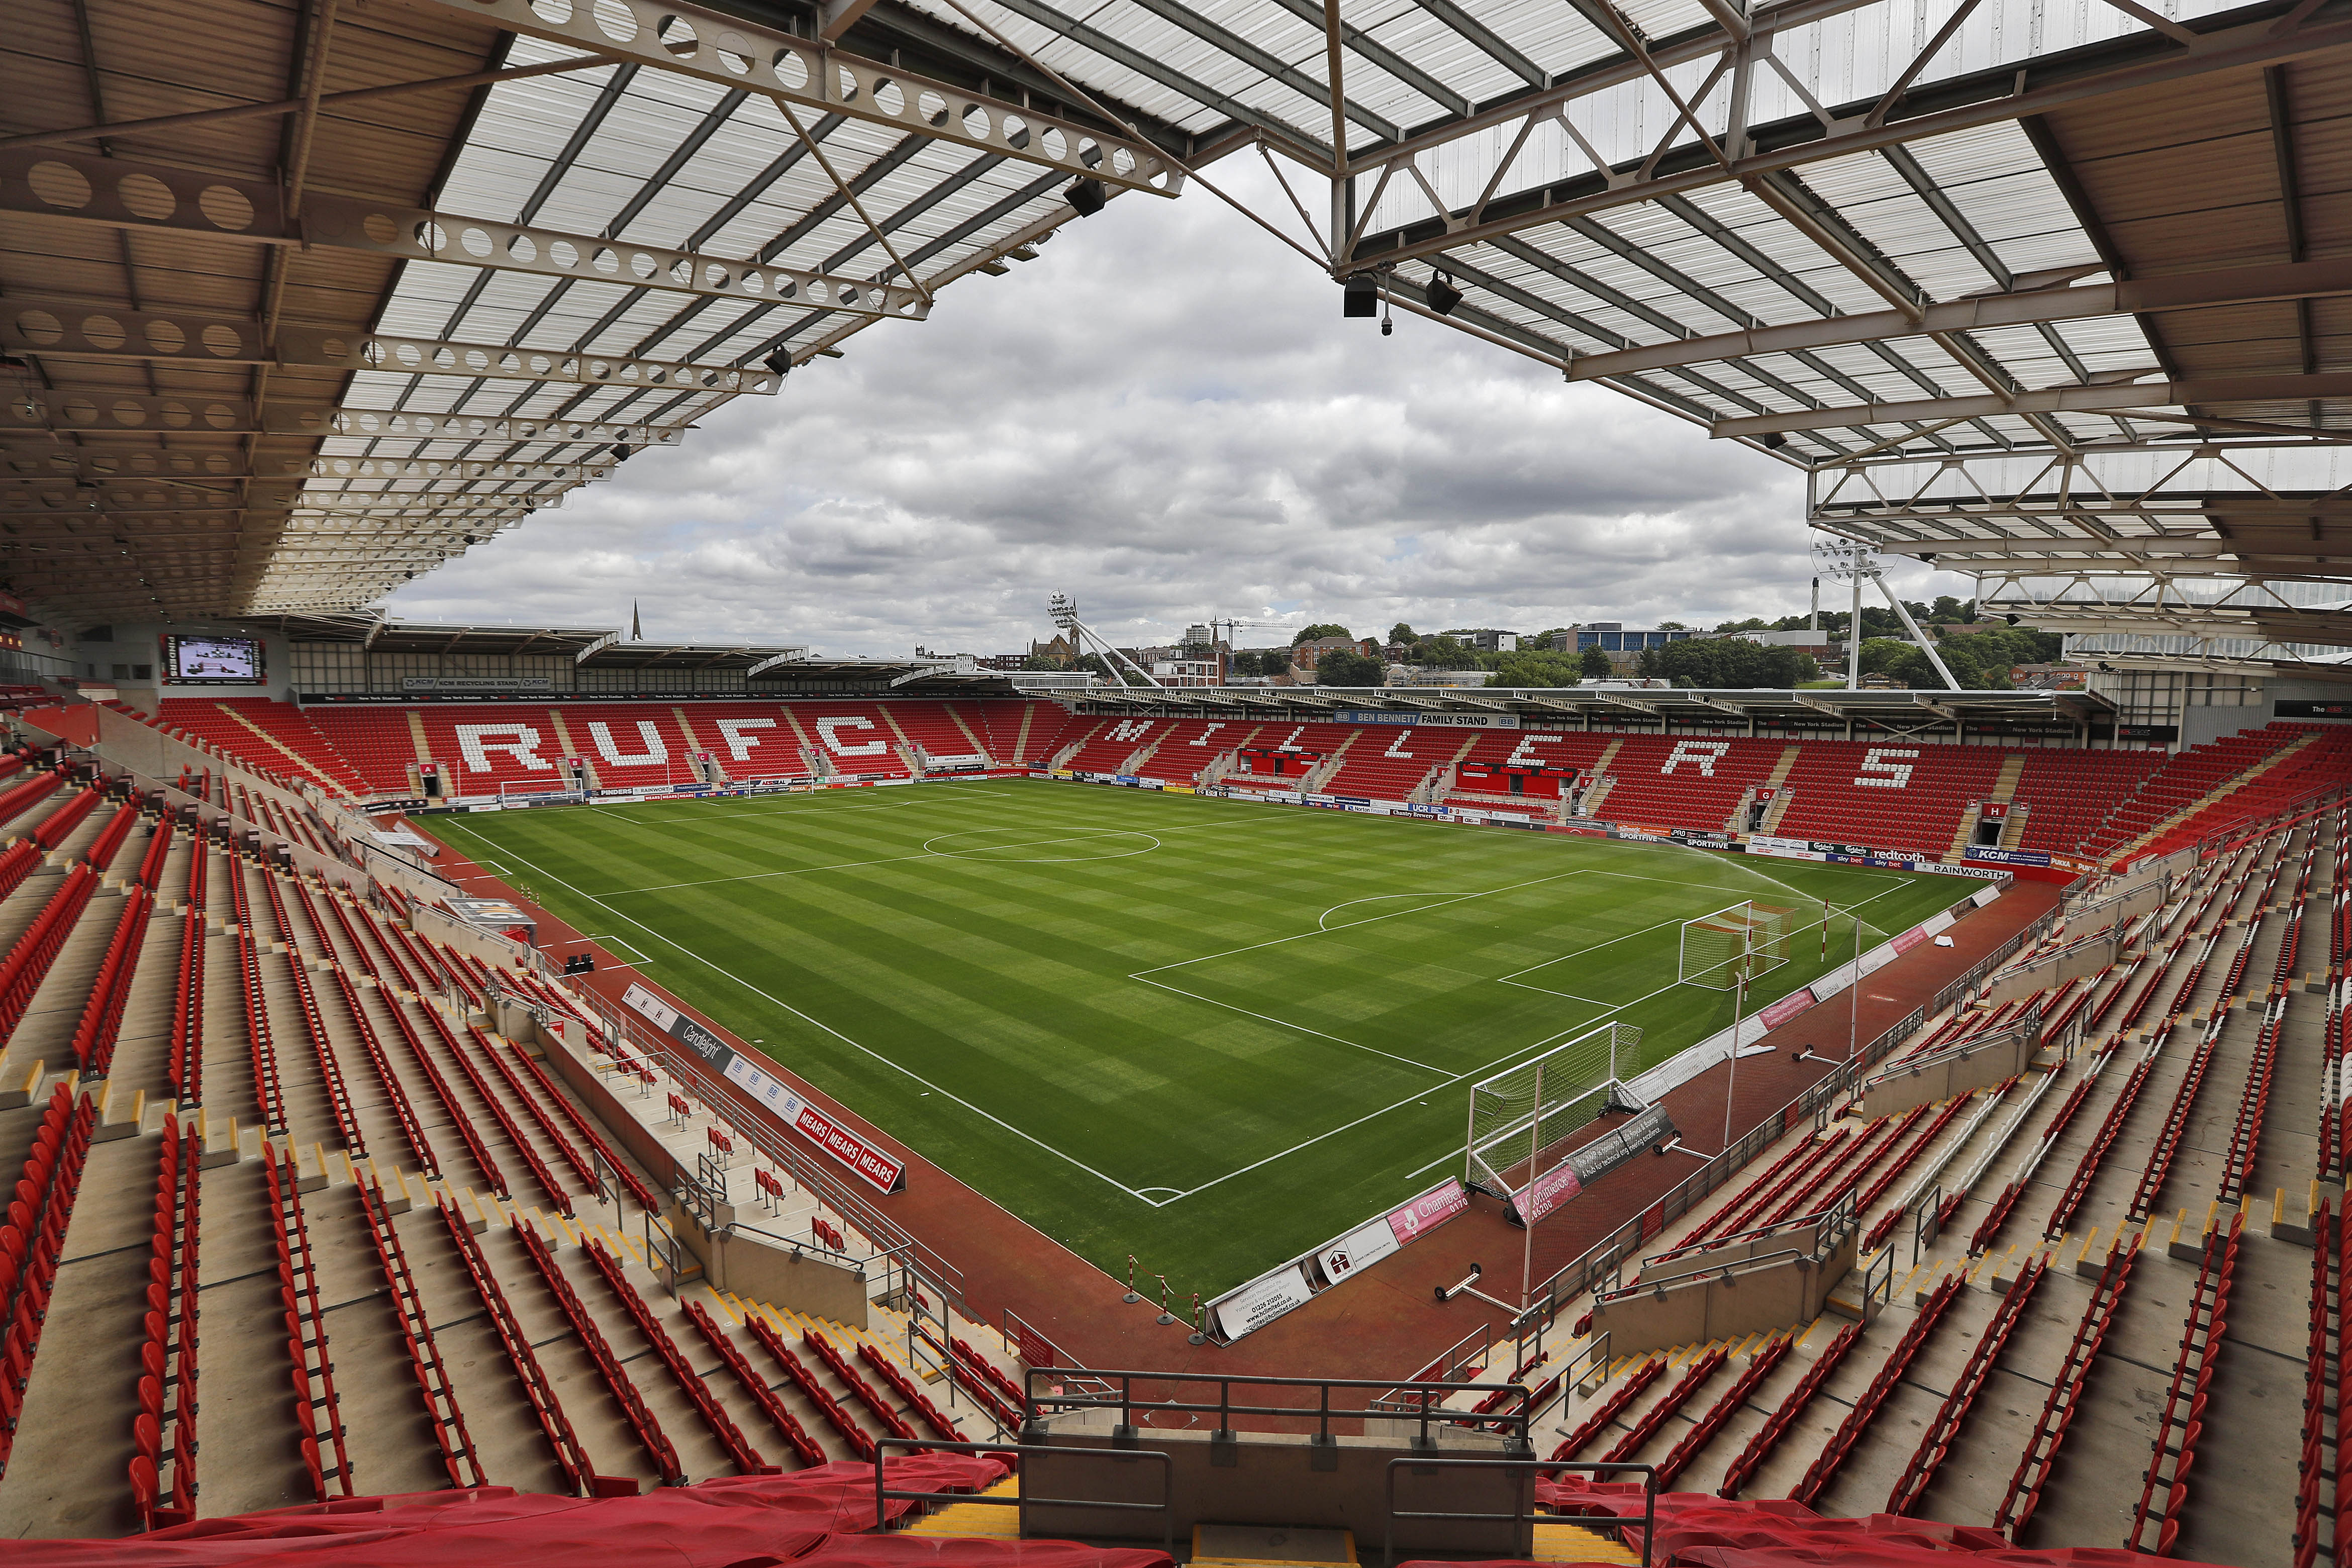 General view of the New York Stadium, taken from the corner